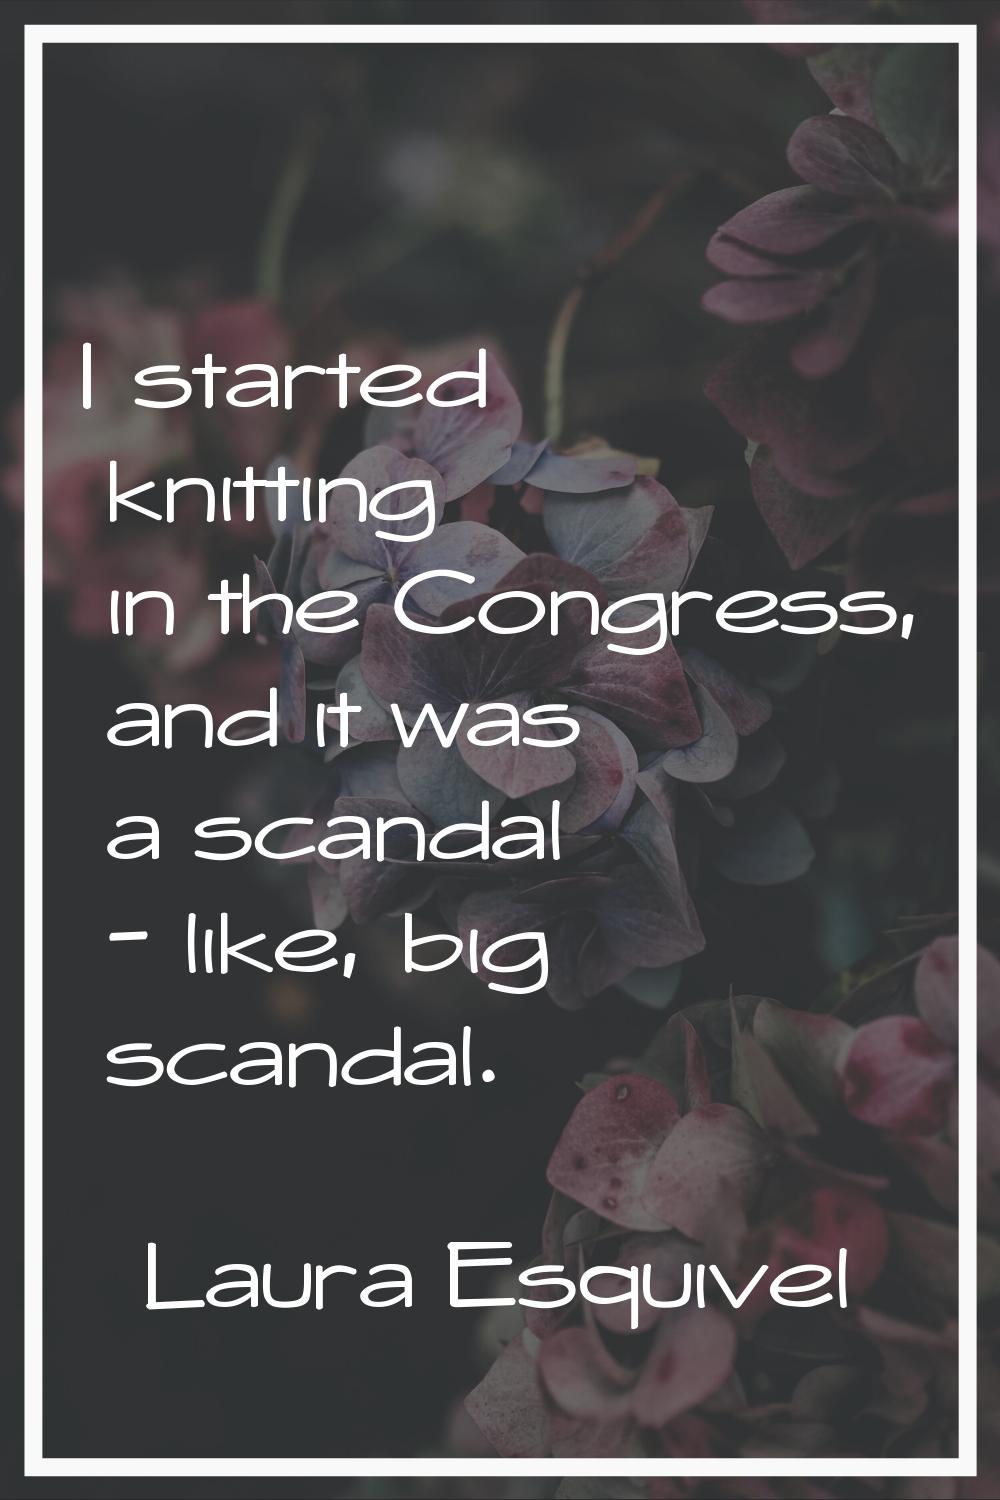 I started knitting in the Congress, and it was a scandal - like, big scandal.